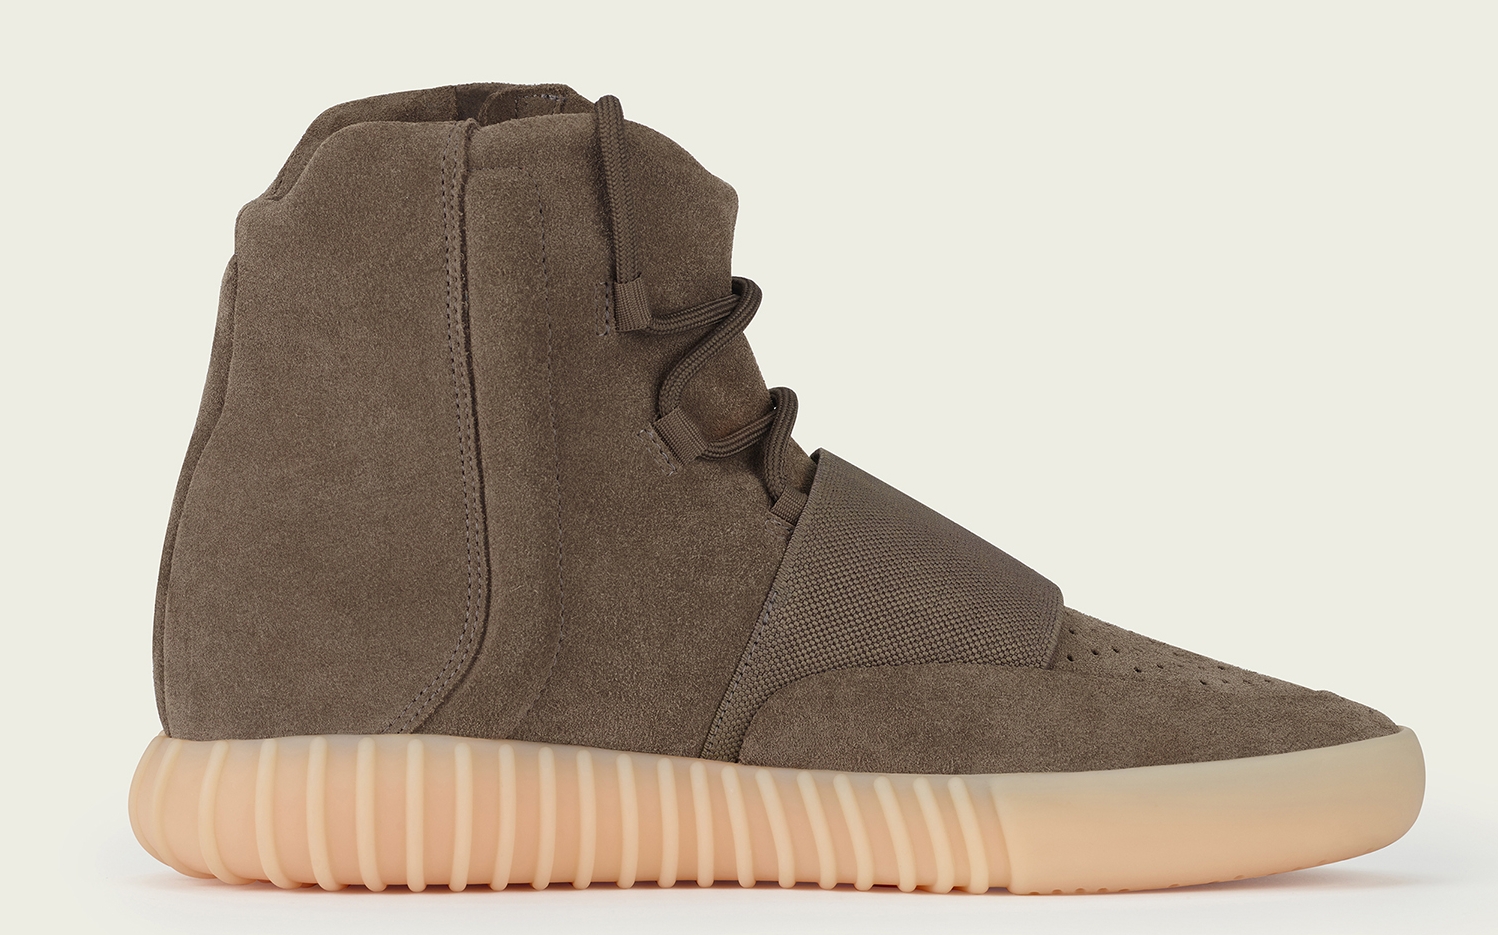 Adidas Yeezy 750 Boost Chocolate Release Date | Sole Collector